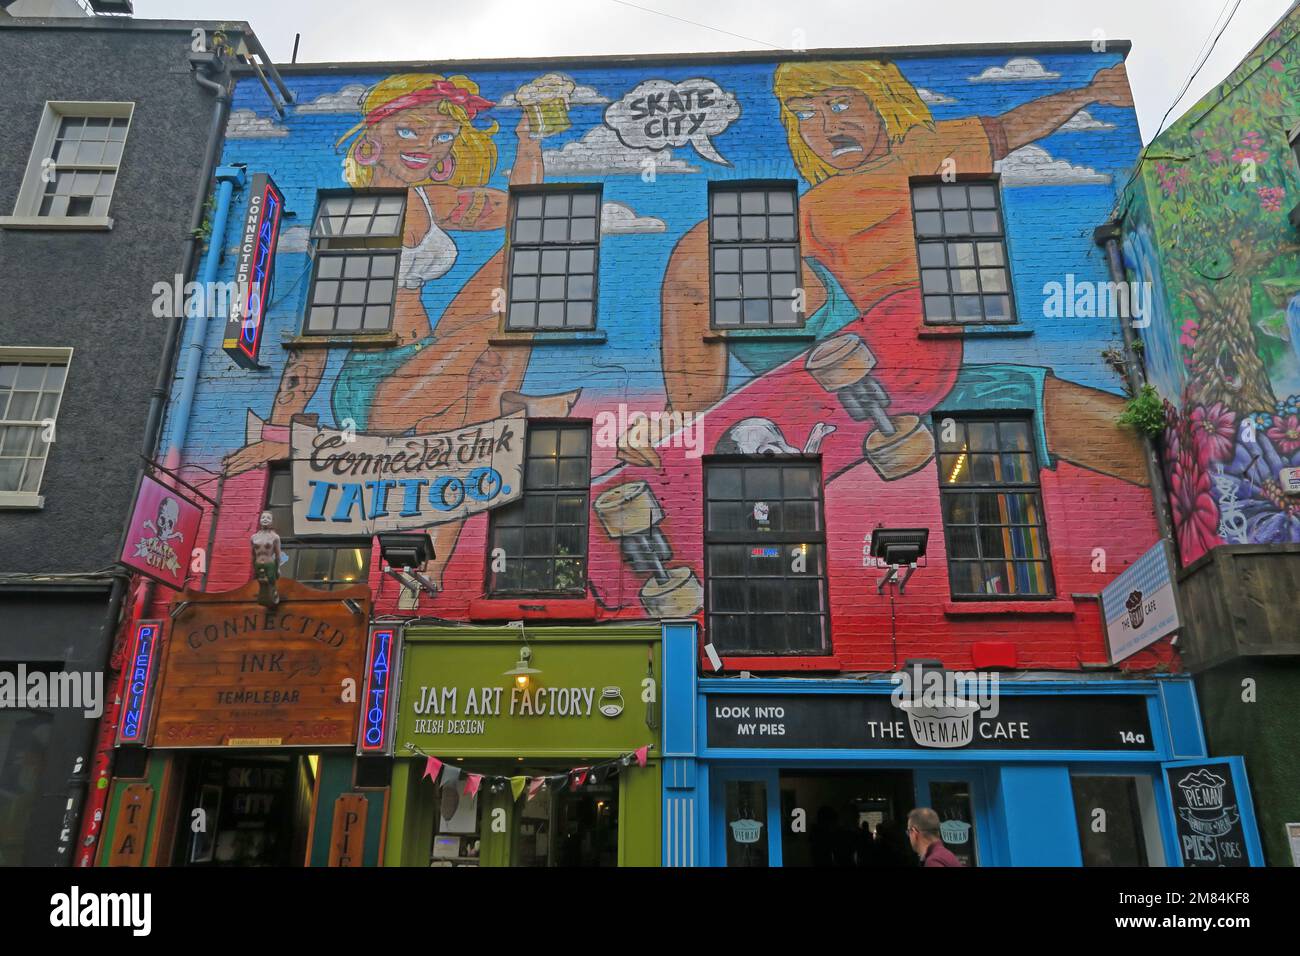 Jam art Factory, Skate City, Connected Ink Tattoo, The Pieman Cafe - 14A Crown Alley, Temple Bar, Dublin 2, D02 RX36, Eire Banque D'Images